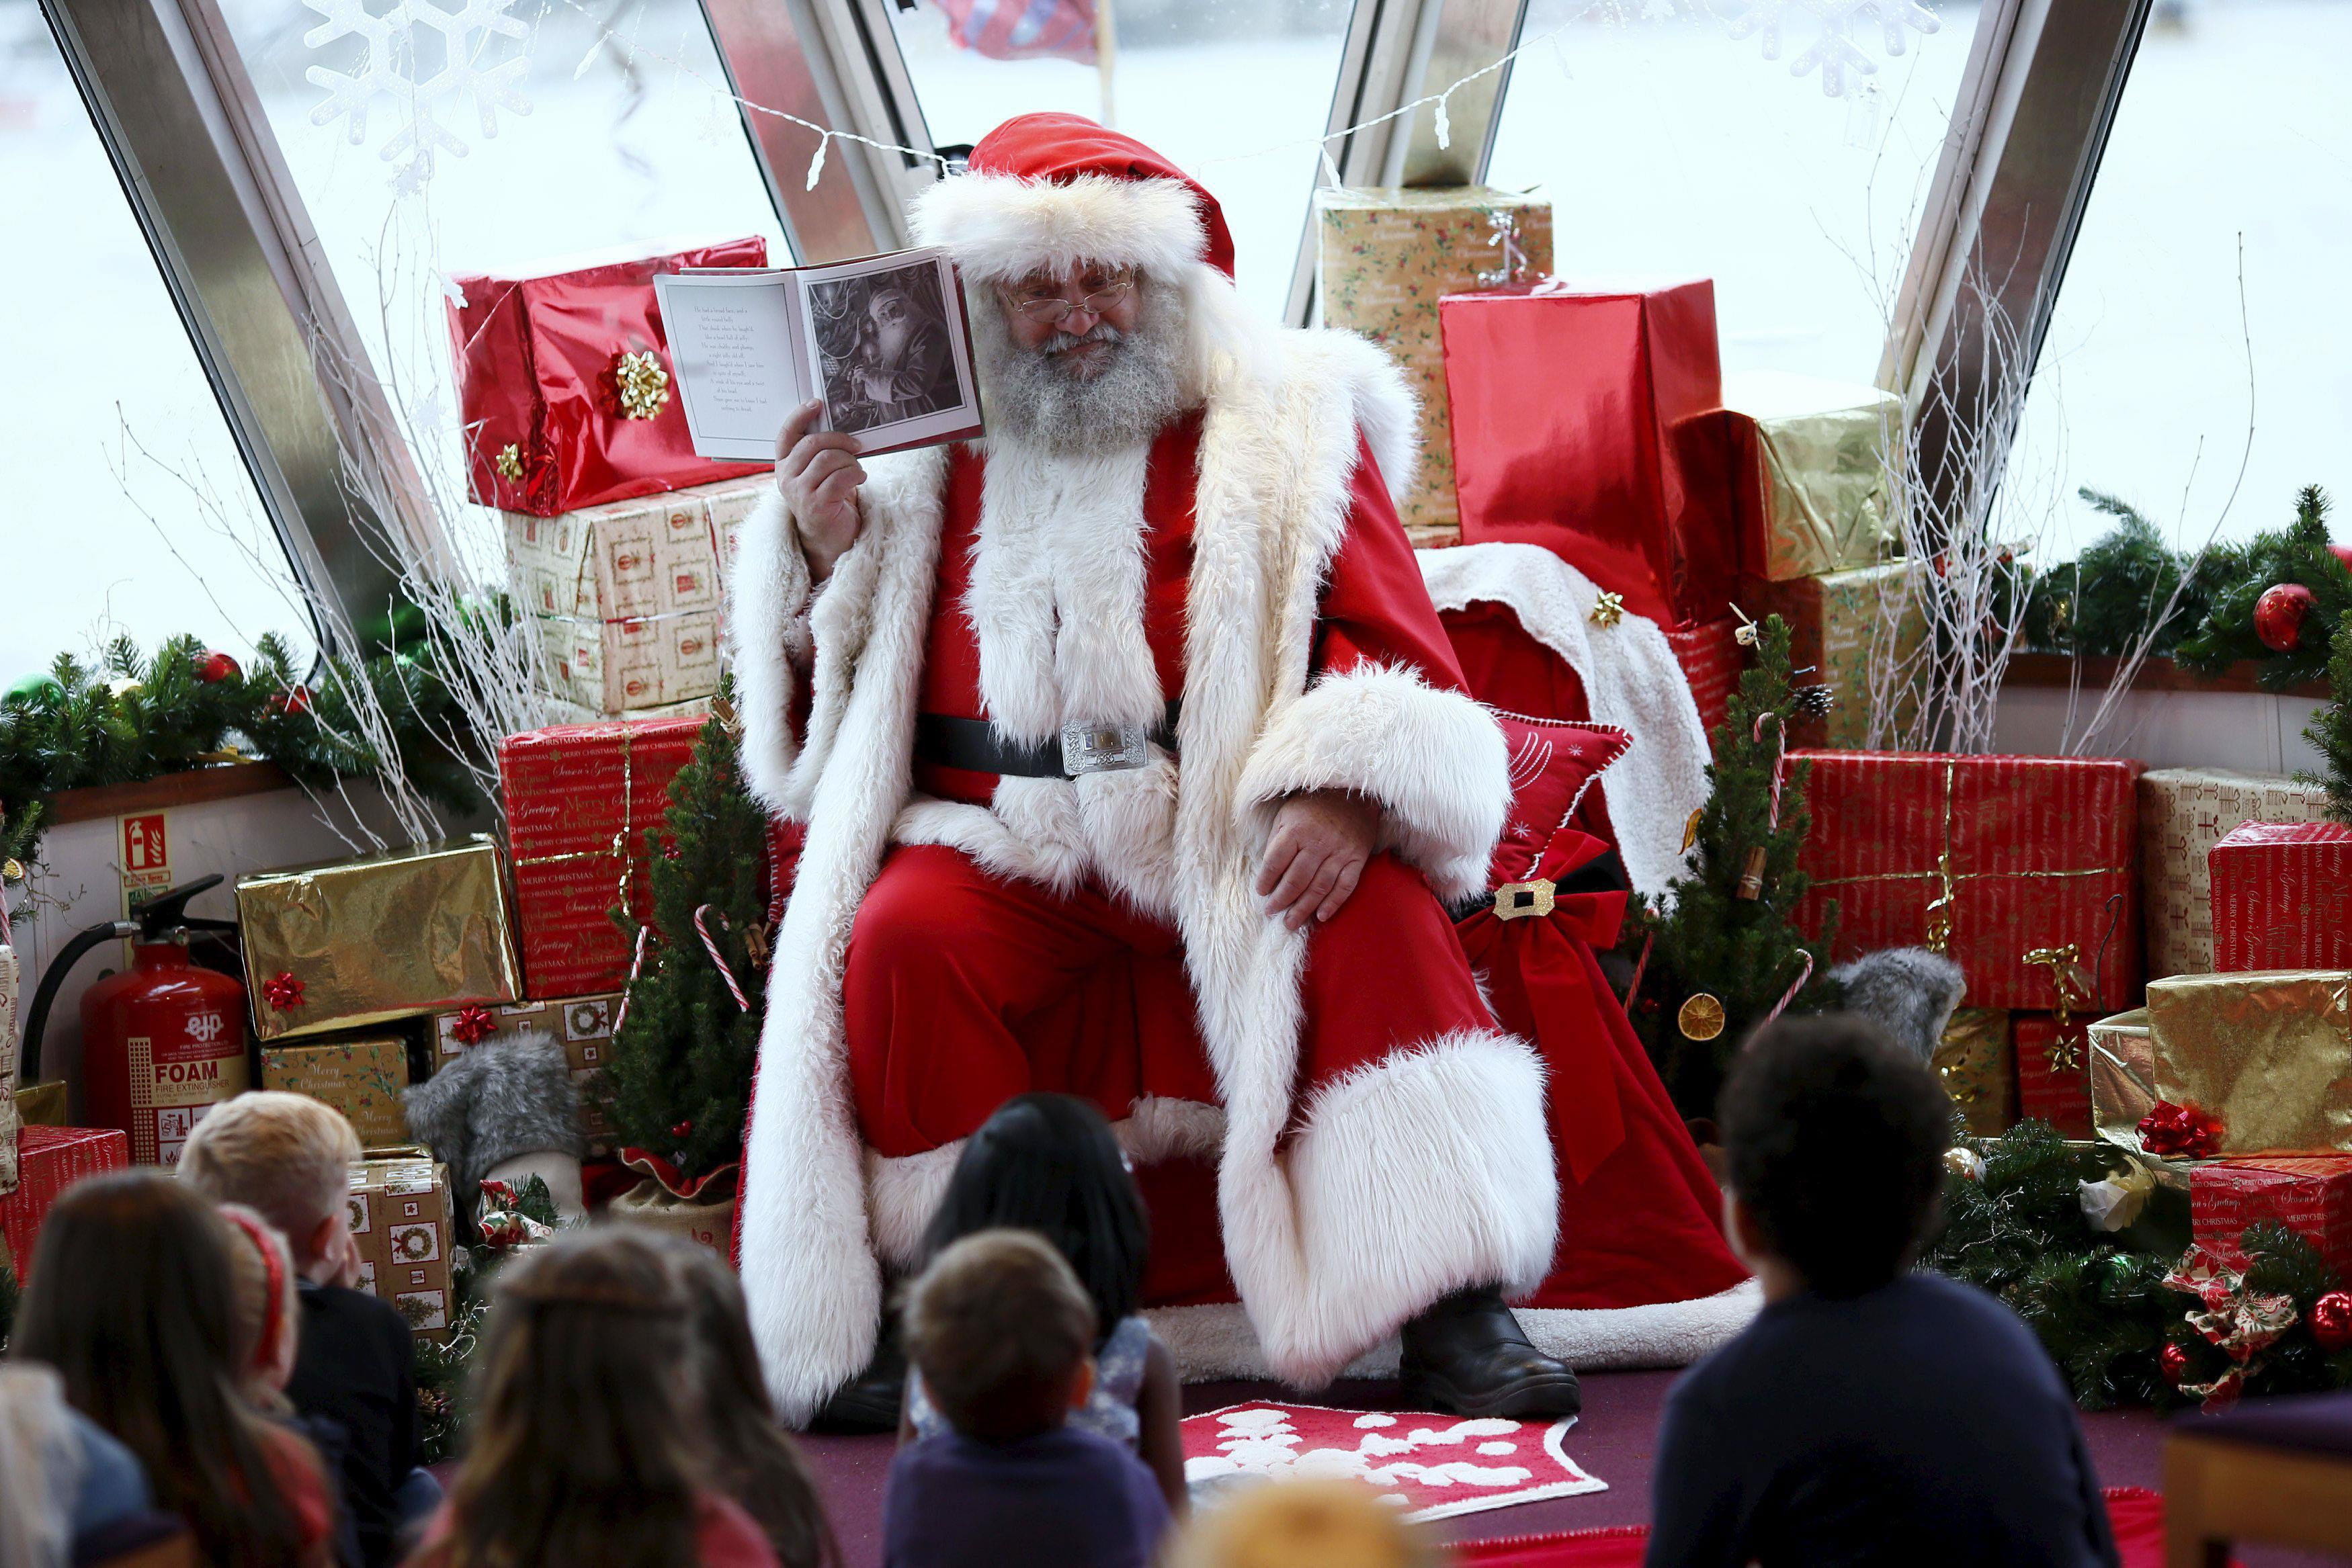 Wider Image: Santa Claus is coming to town